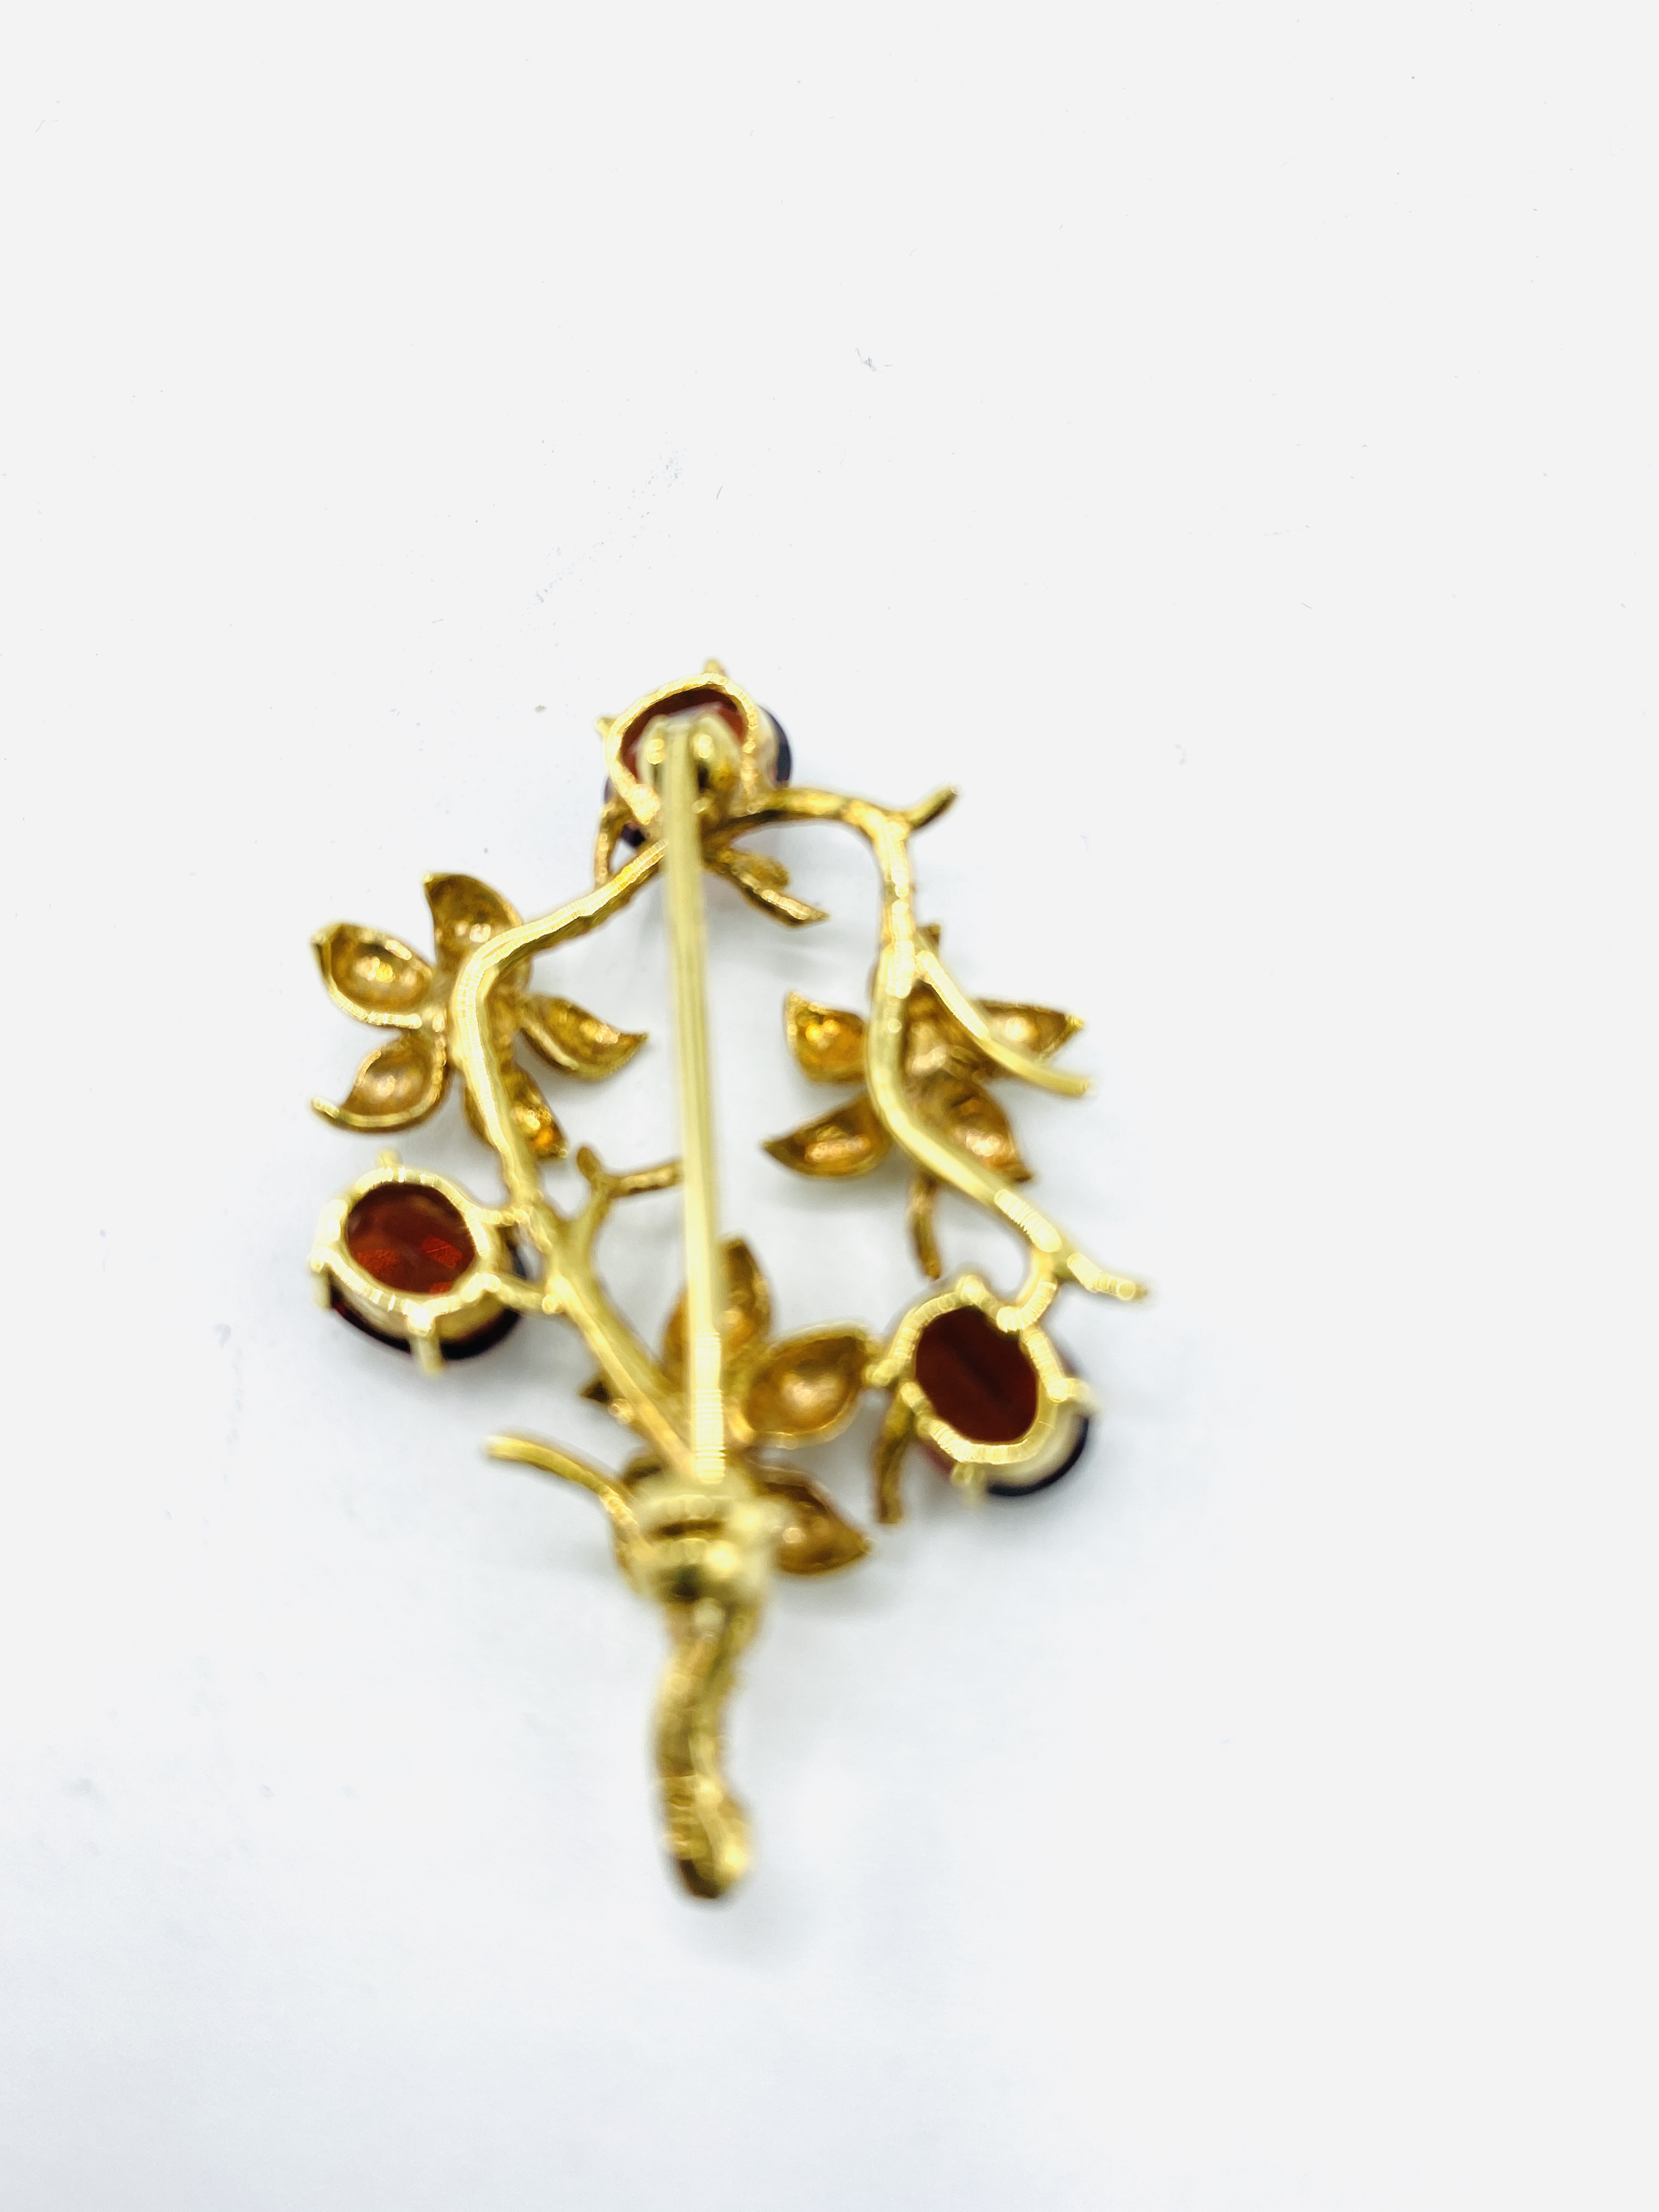 9ct gold floral brooch set with garnets and pearls - Image 2 of 2